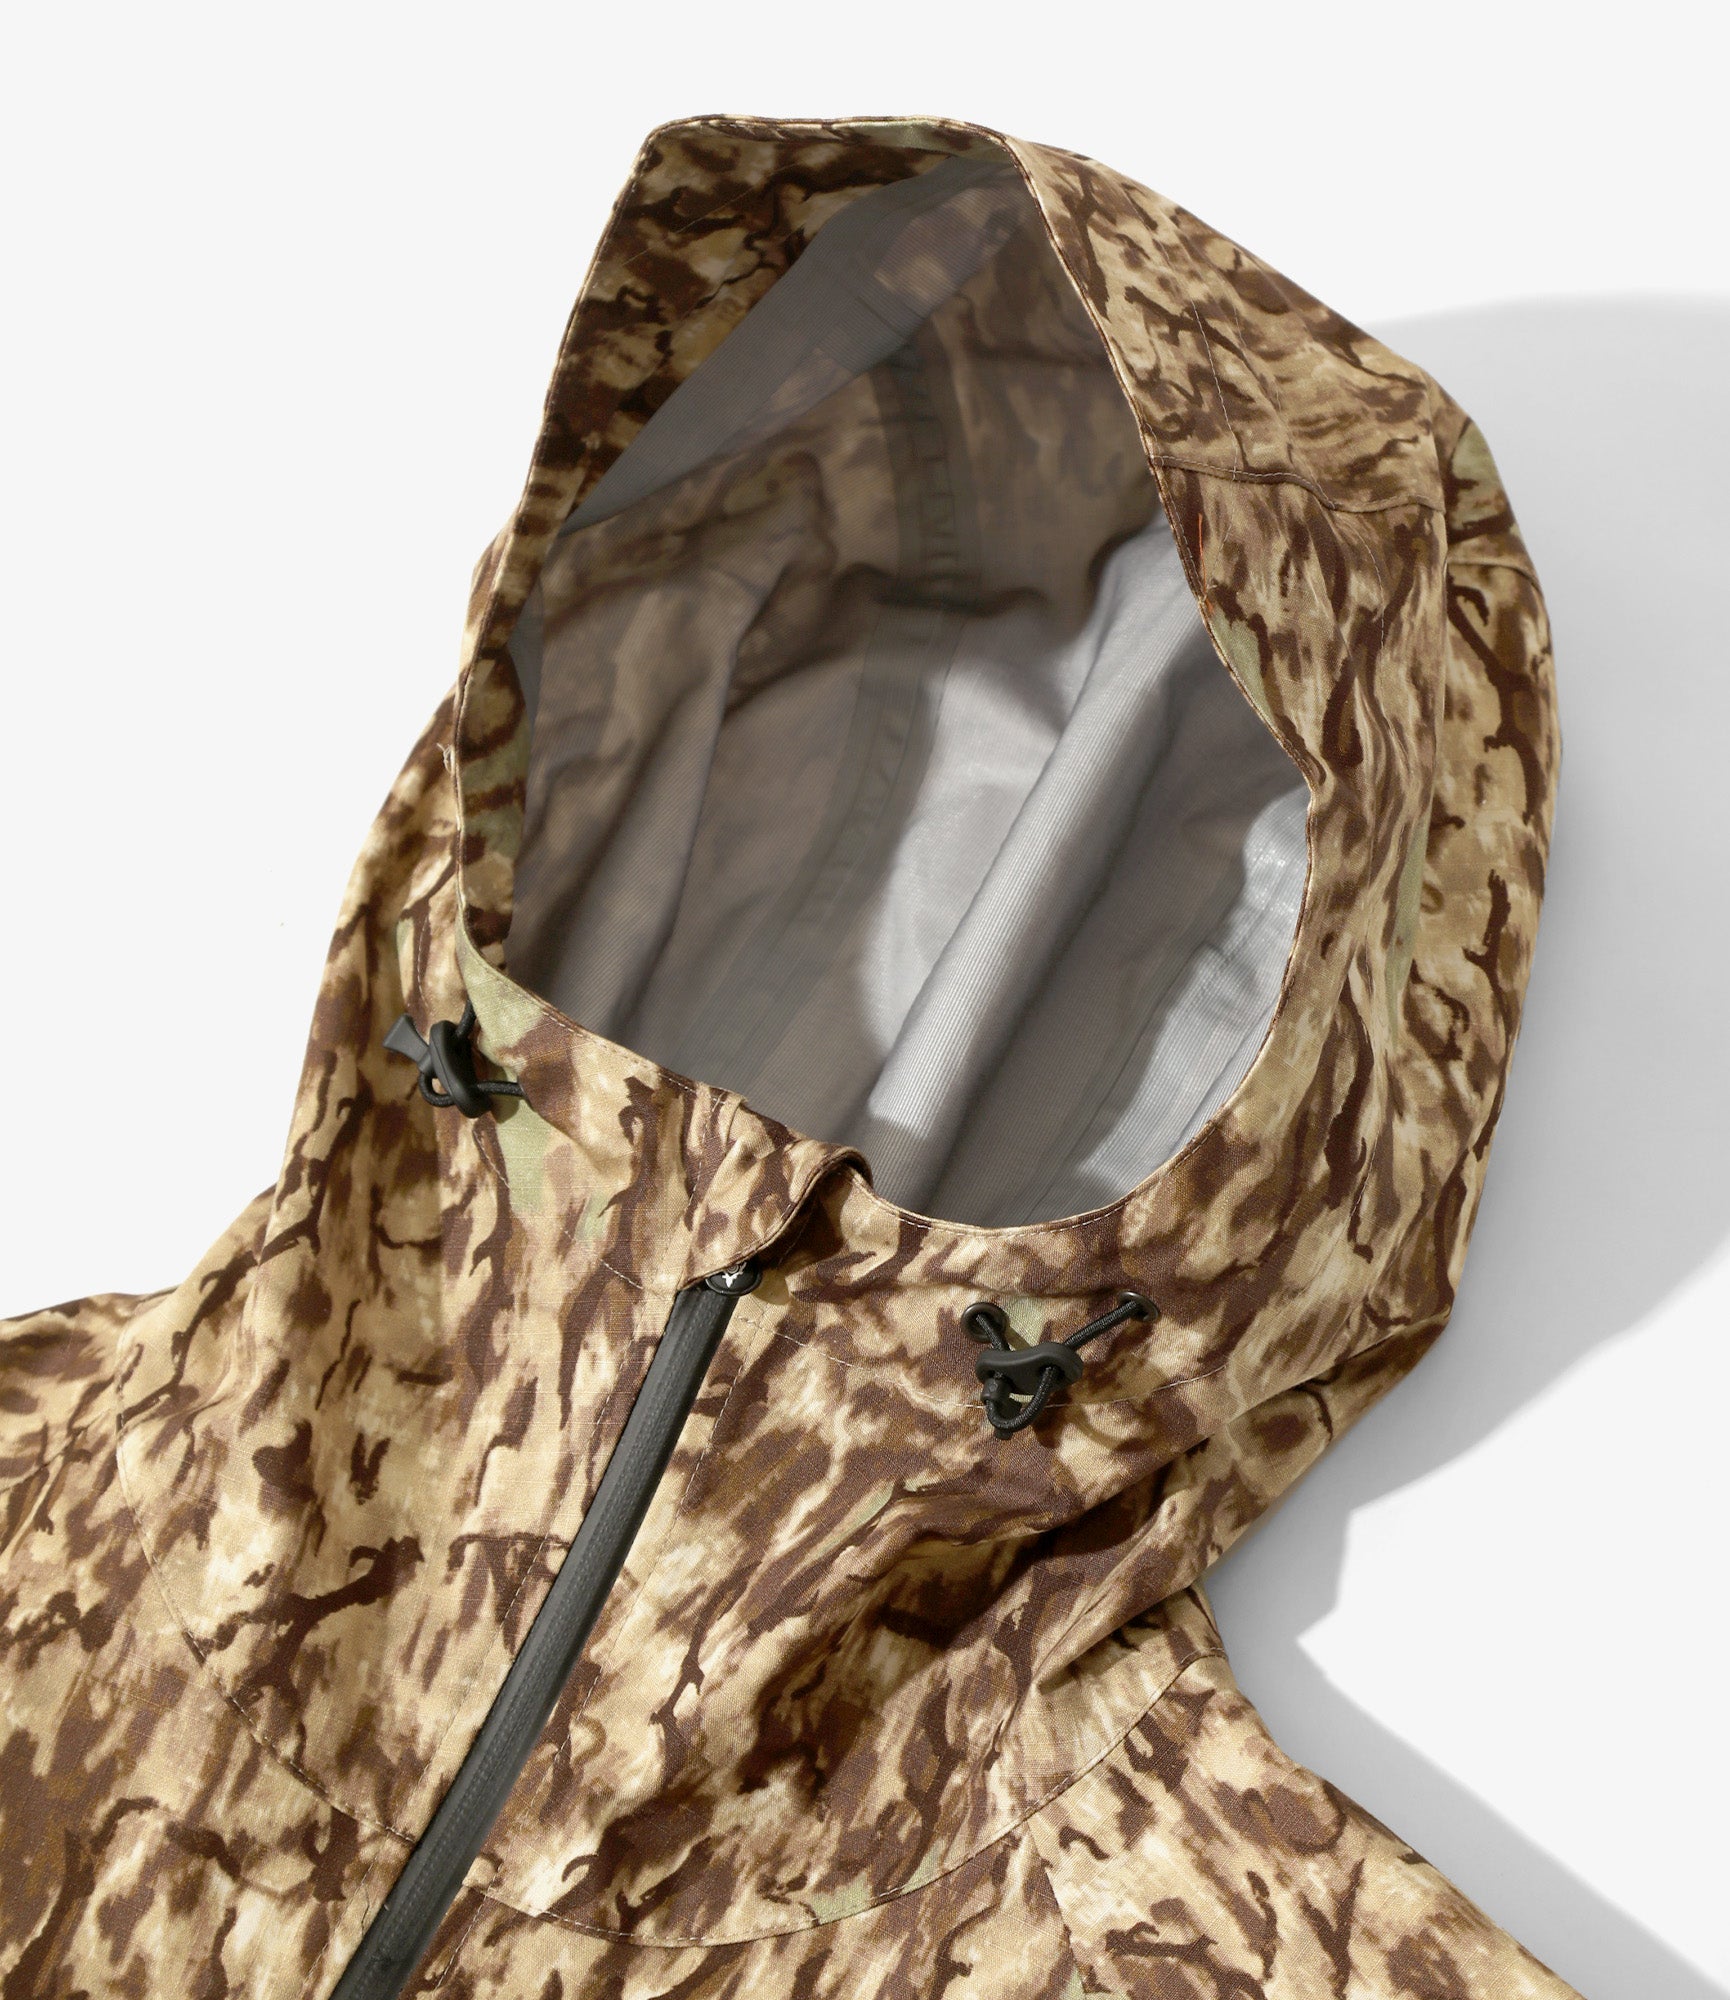 South2 West8 Weather Effect Jacket - Cotton Ripstop  / 3Layer - Horn Camo